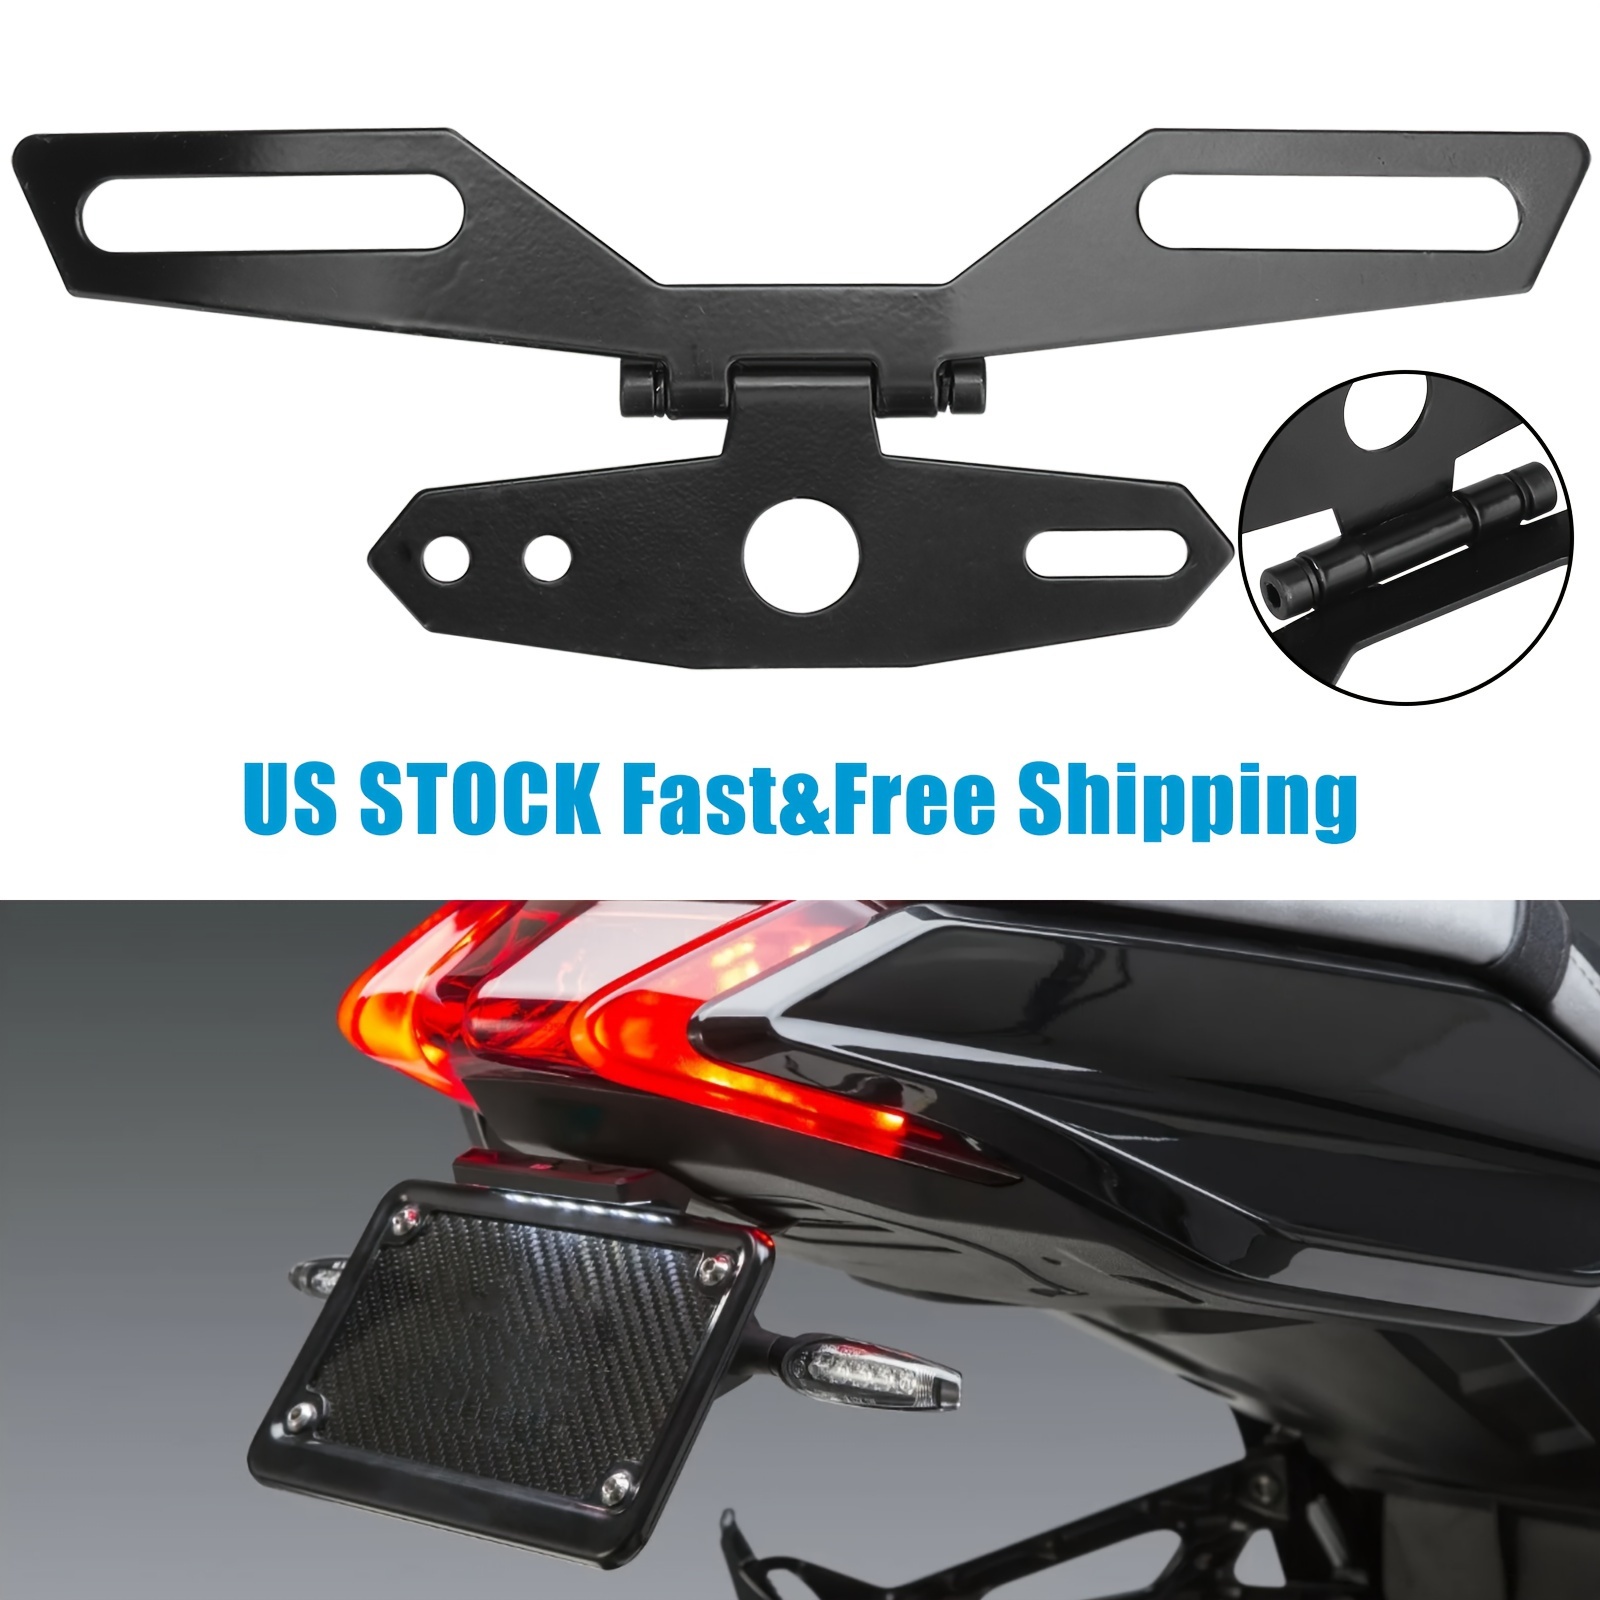 

1pc Adjustable Motorcycle Accessories Universal Folding License Plate Holder Rear Tail Light Bracket Mount